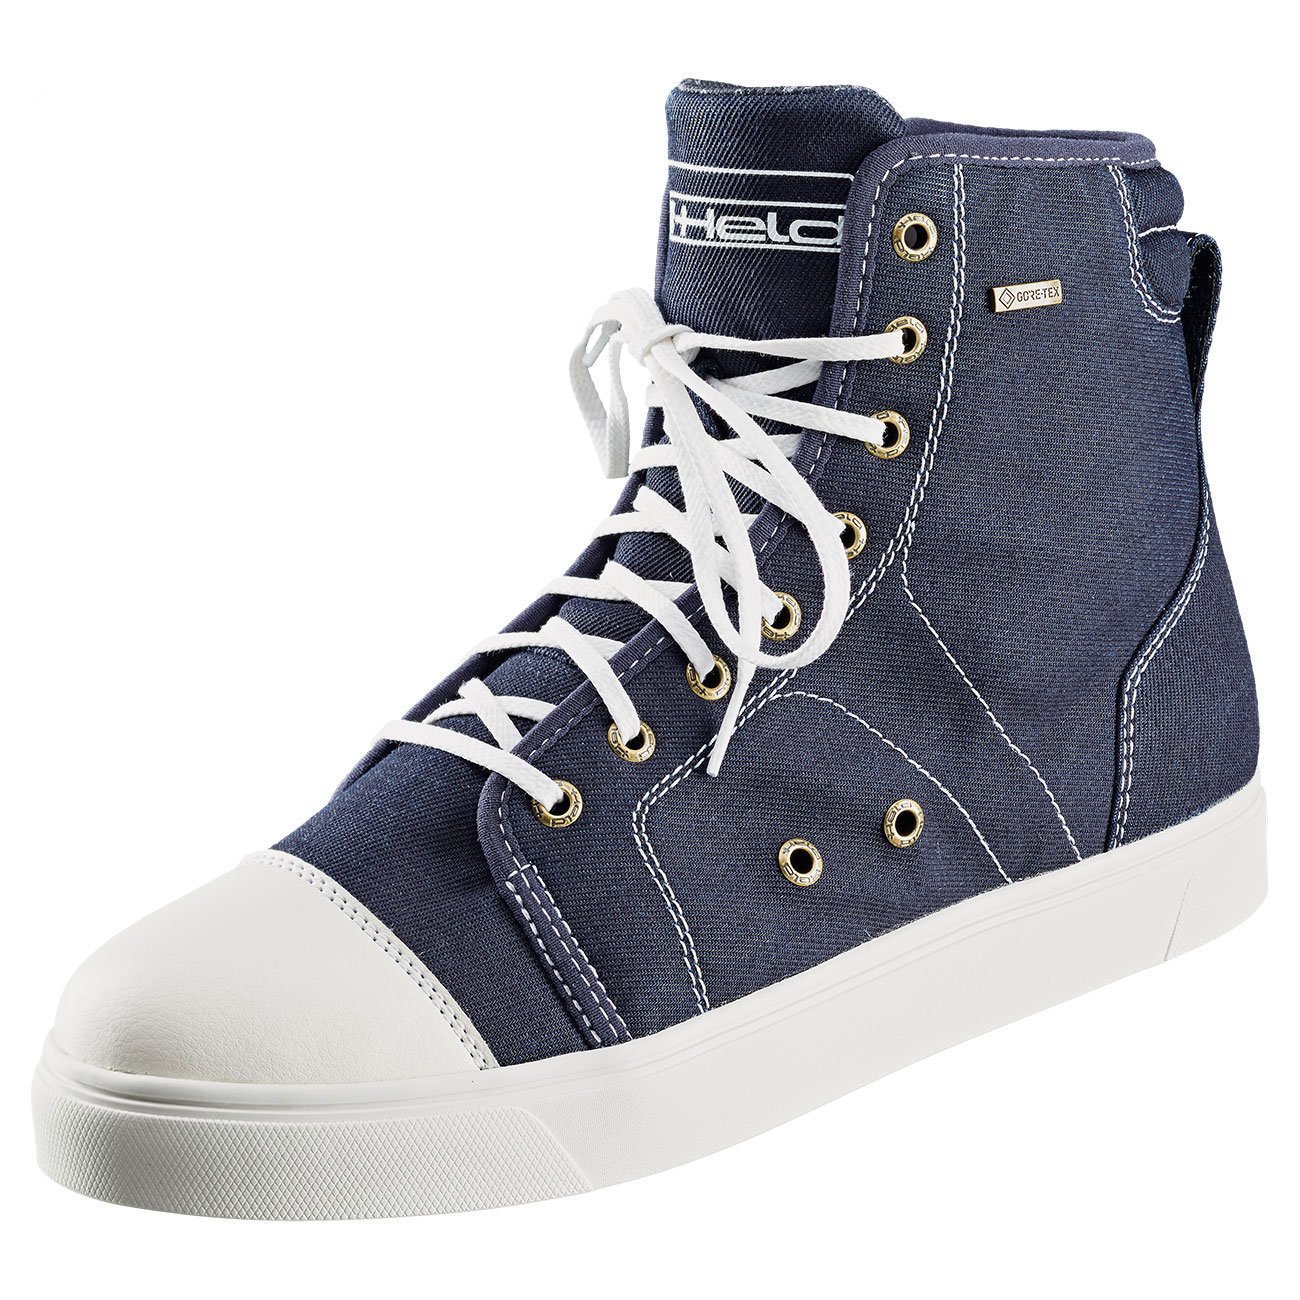 Image of EU Held College Rider GTX Bleu Chaussures Taille 37